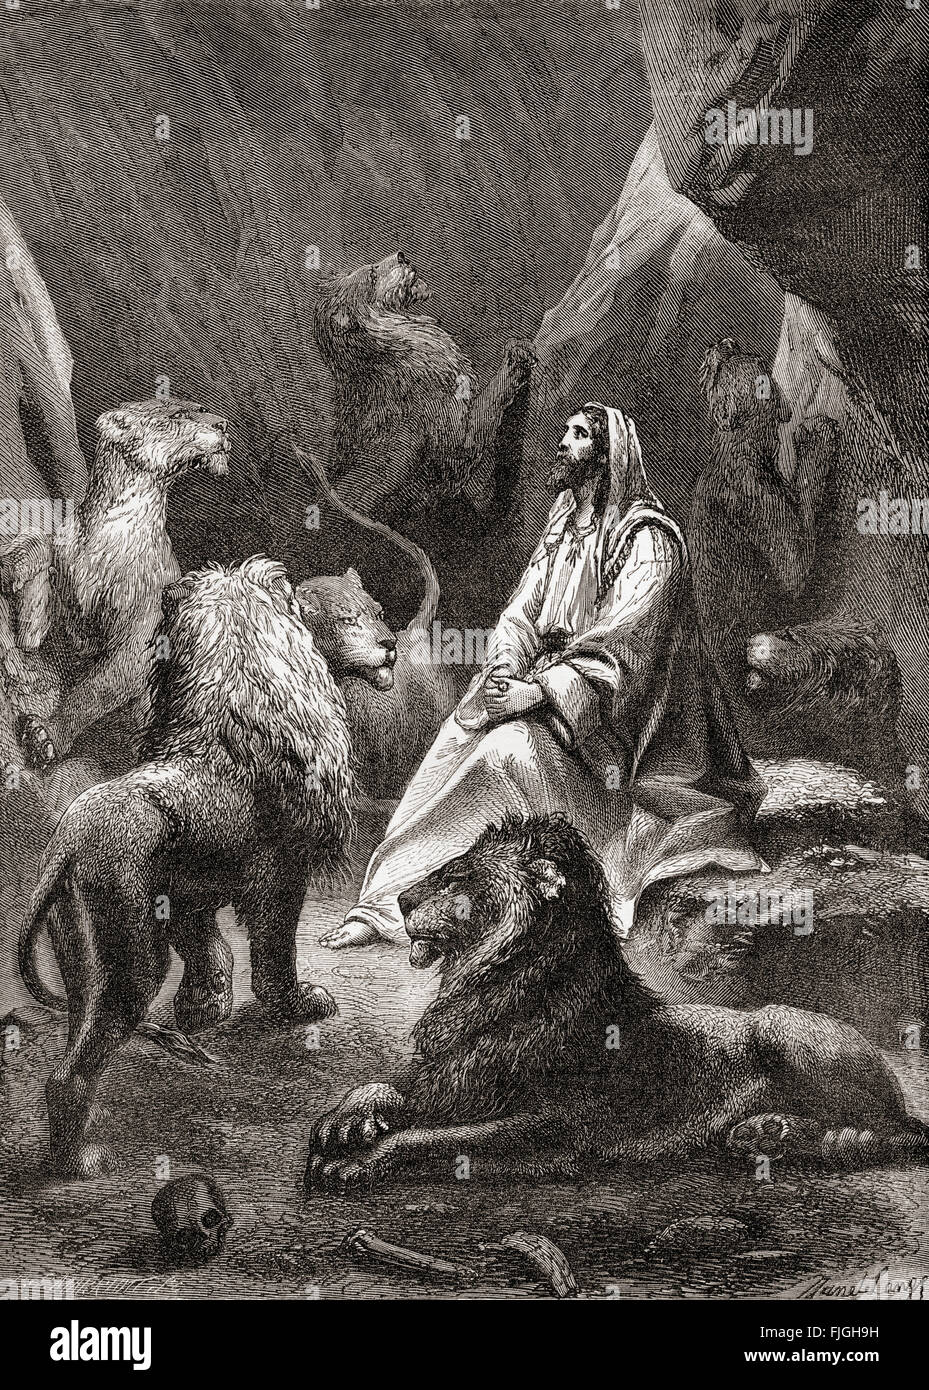 Daniel in the lion's den. From The Book of Daniel, Old Testament. Stock Photo